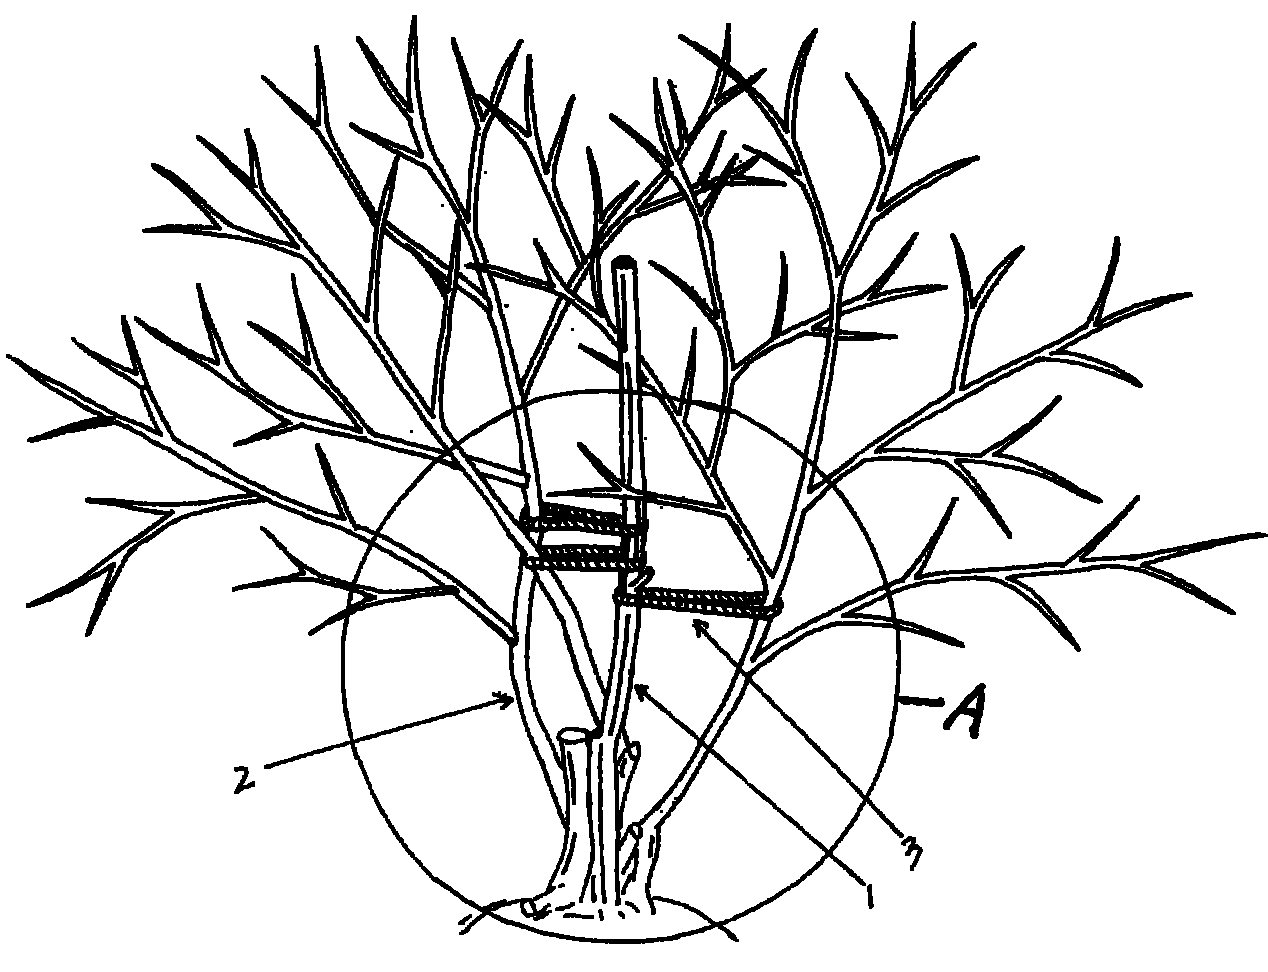 Method for retaining trunk and molding green date tree